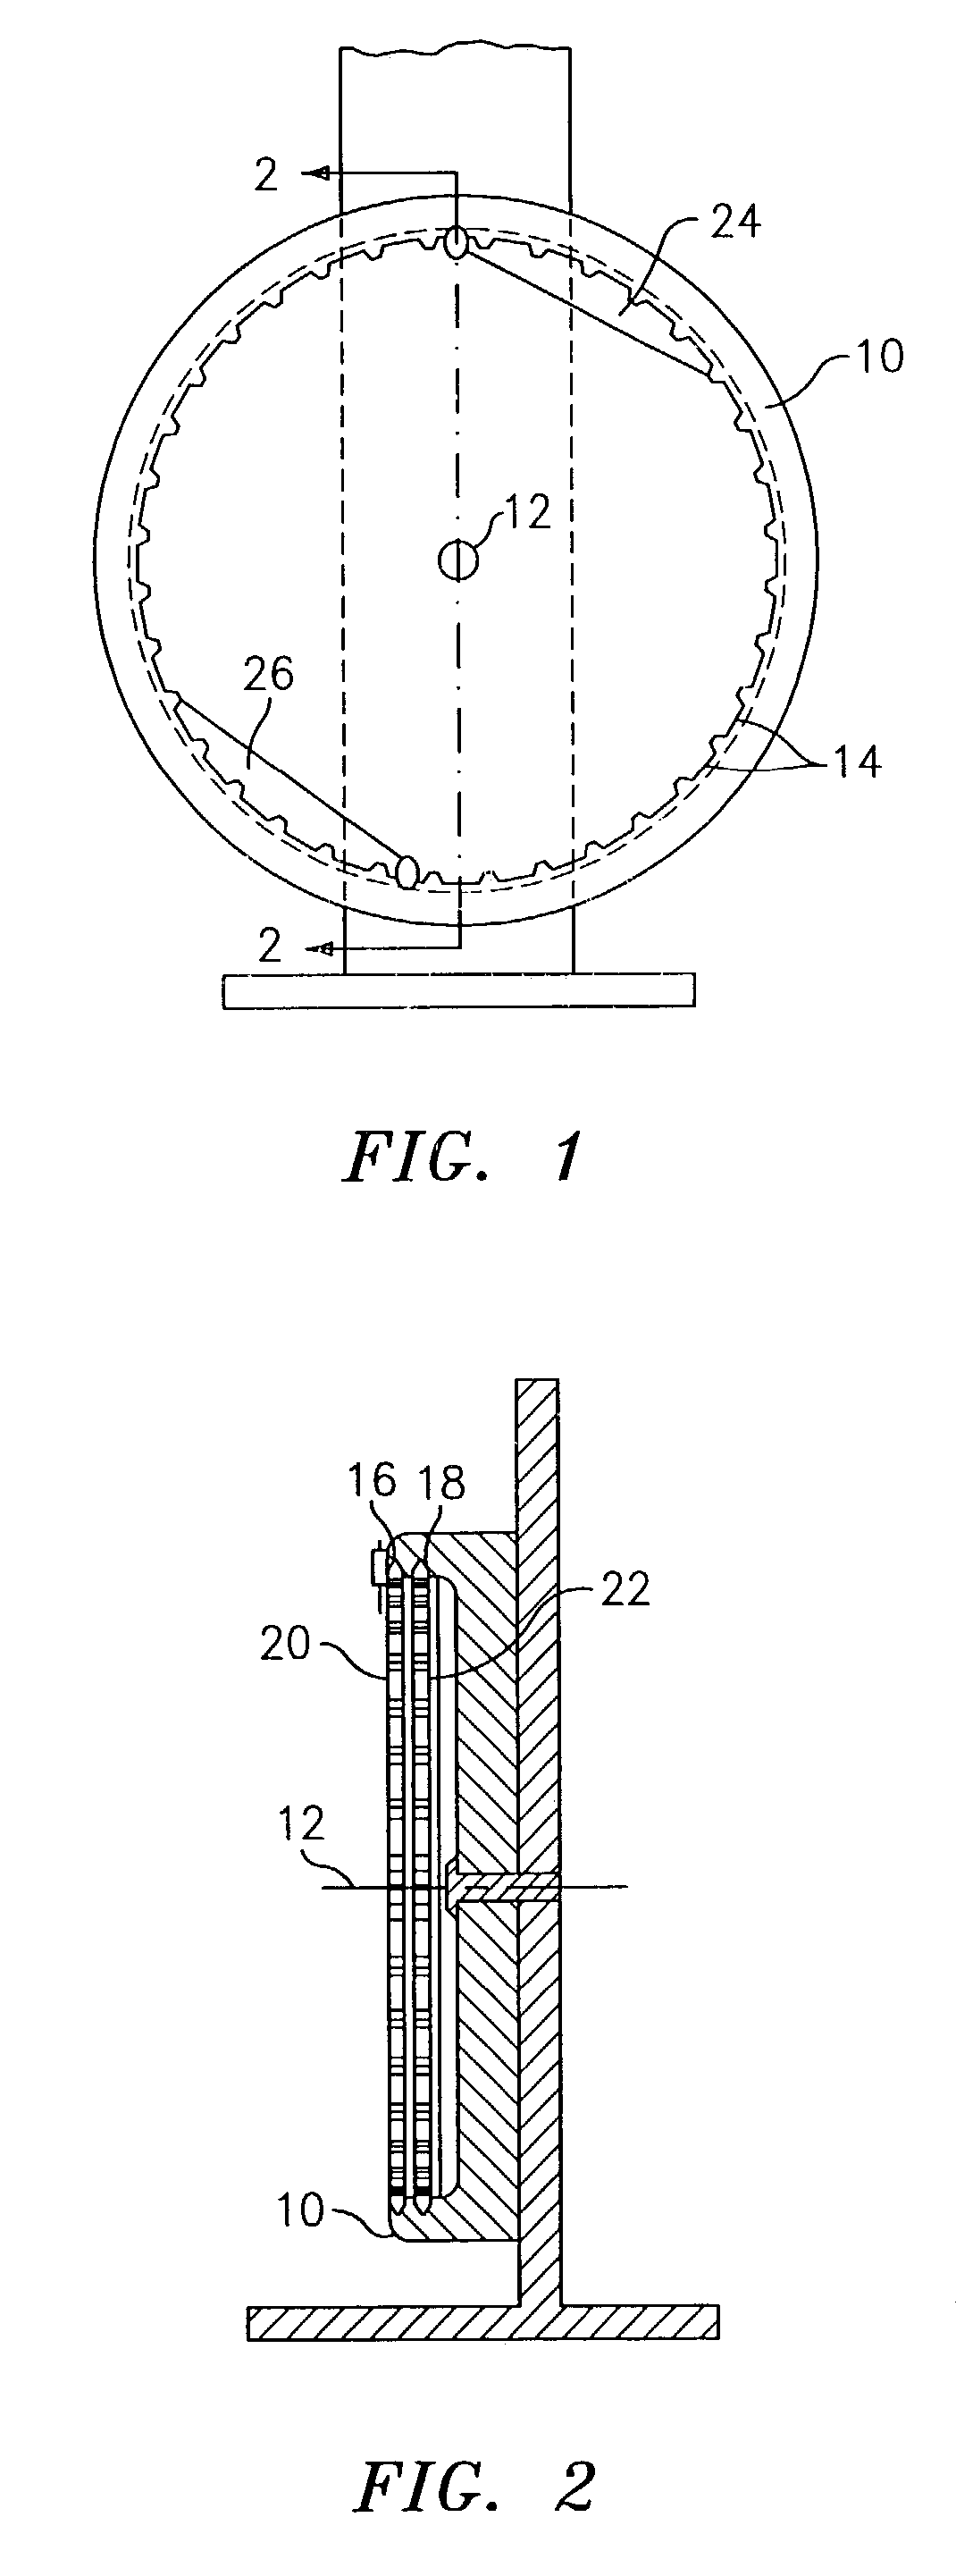 Rotor balancing system for turbomachinery